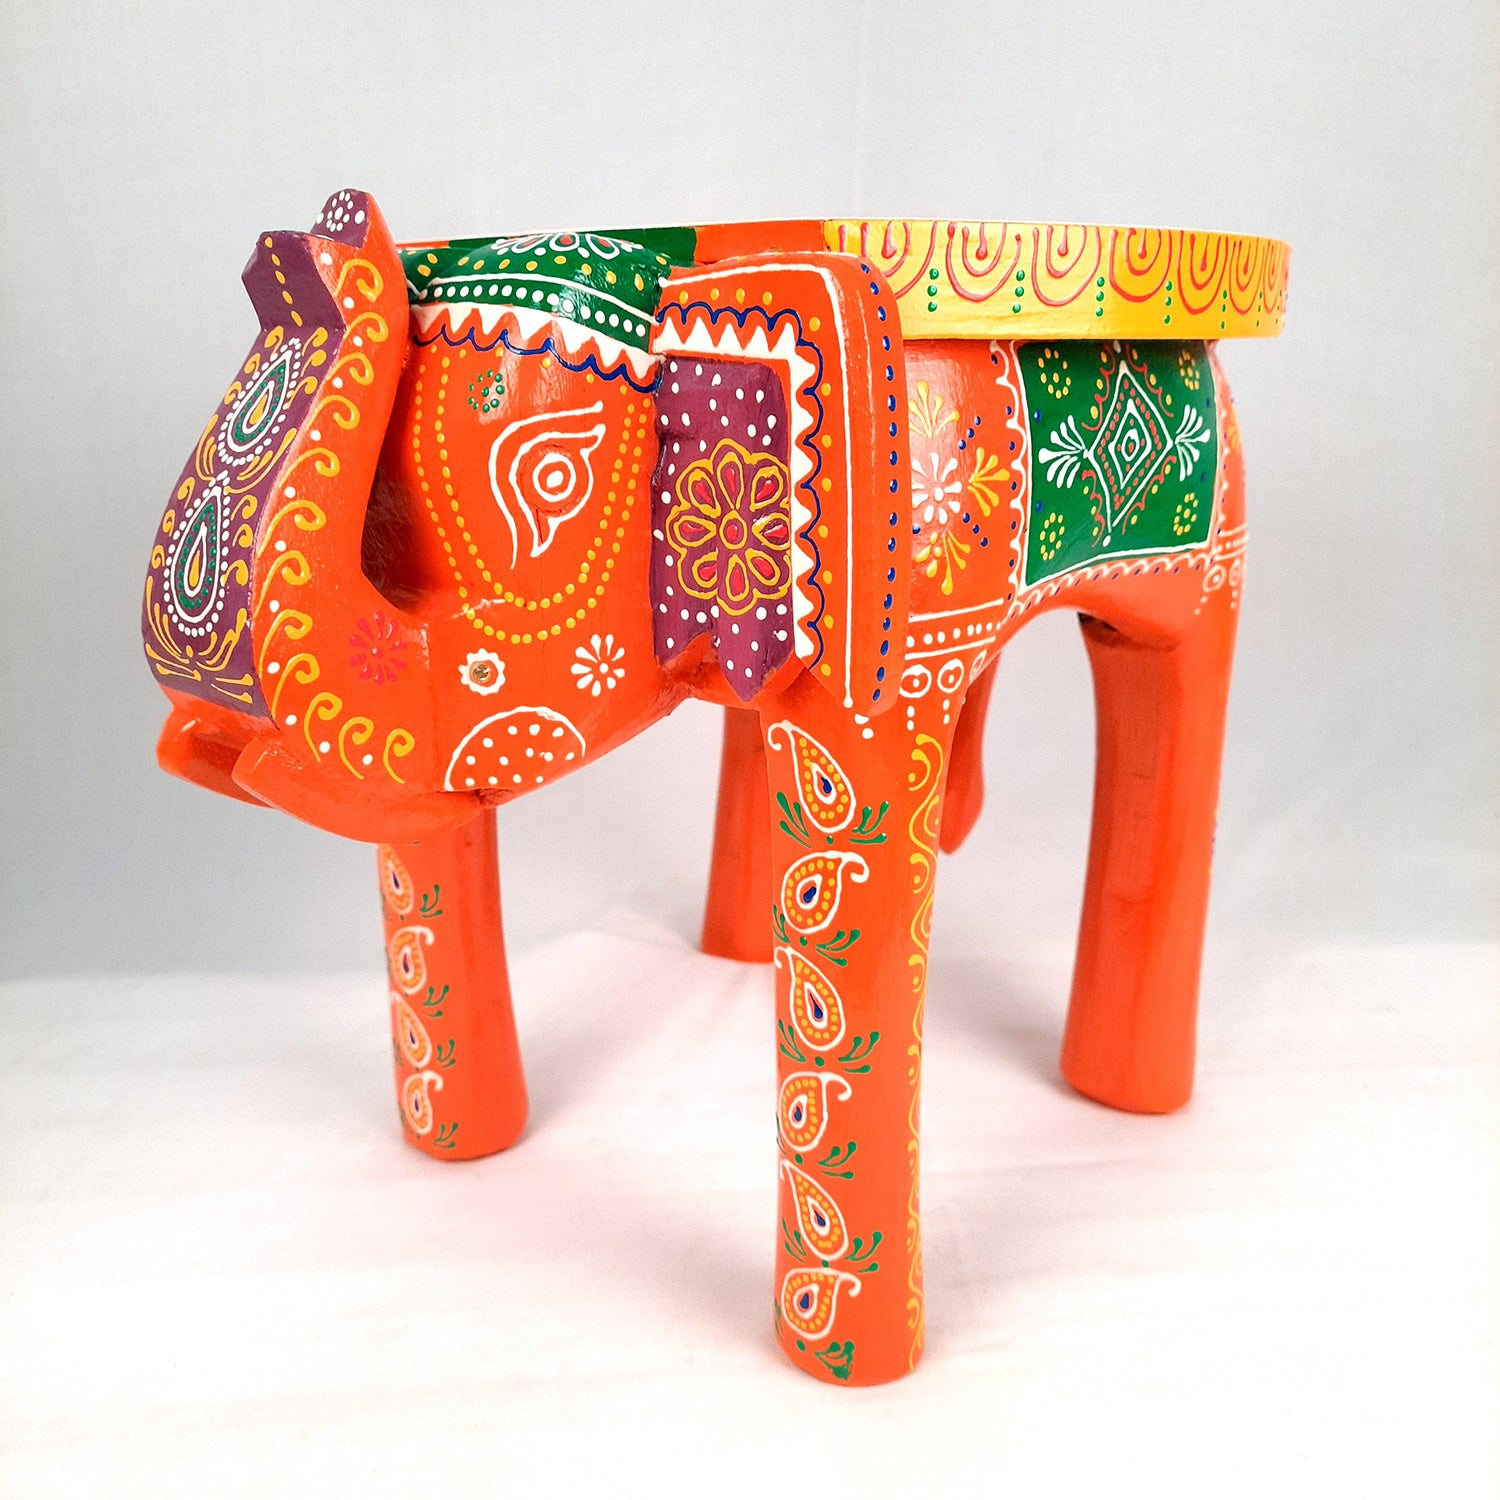 End Tables - Elephant Design | Wooden Side Table for Keeping Lamp, Vases & Plants | Small Stools - for Bedside, Home Decor, Corners, Sofa Side Stool, Office & Gifts - 12 Inch - apkamart #color_Orange